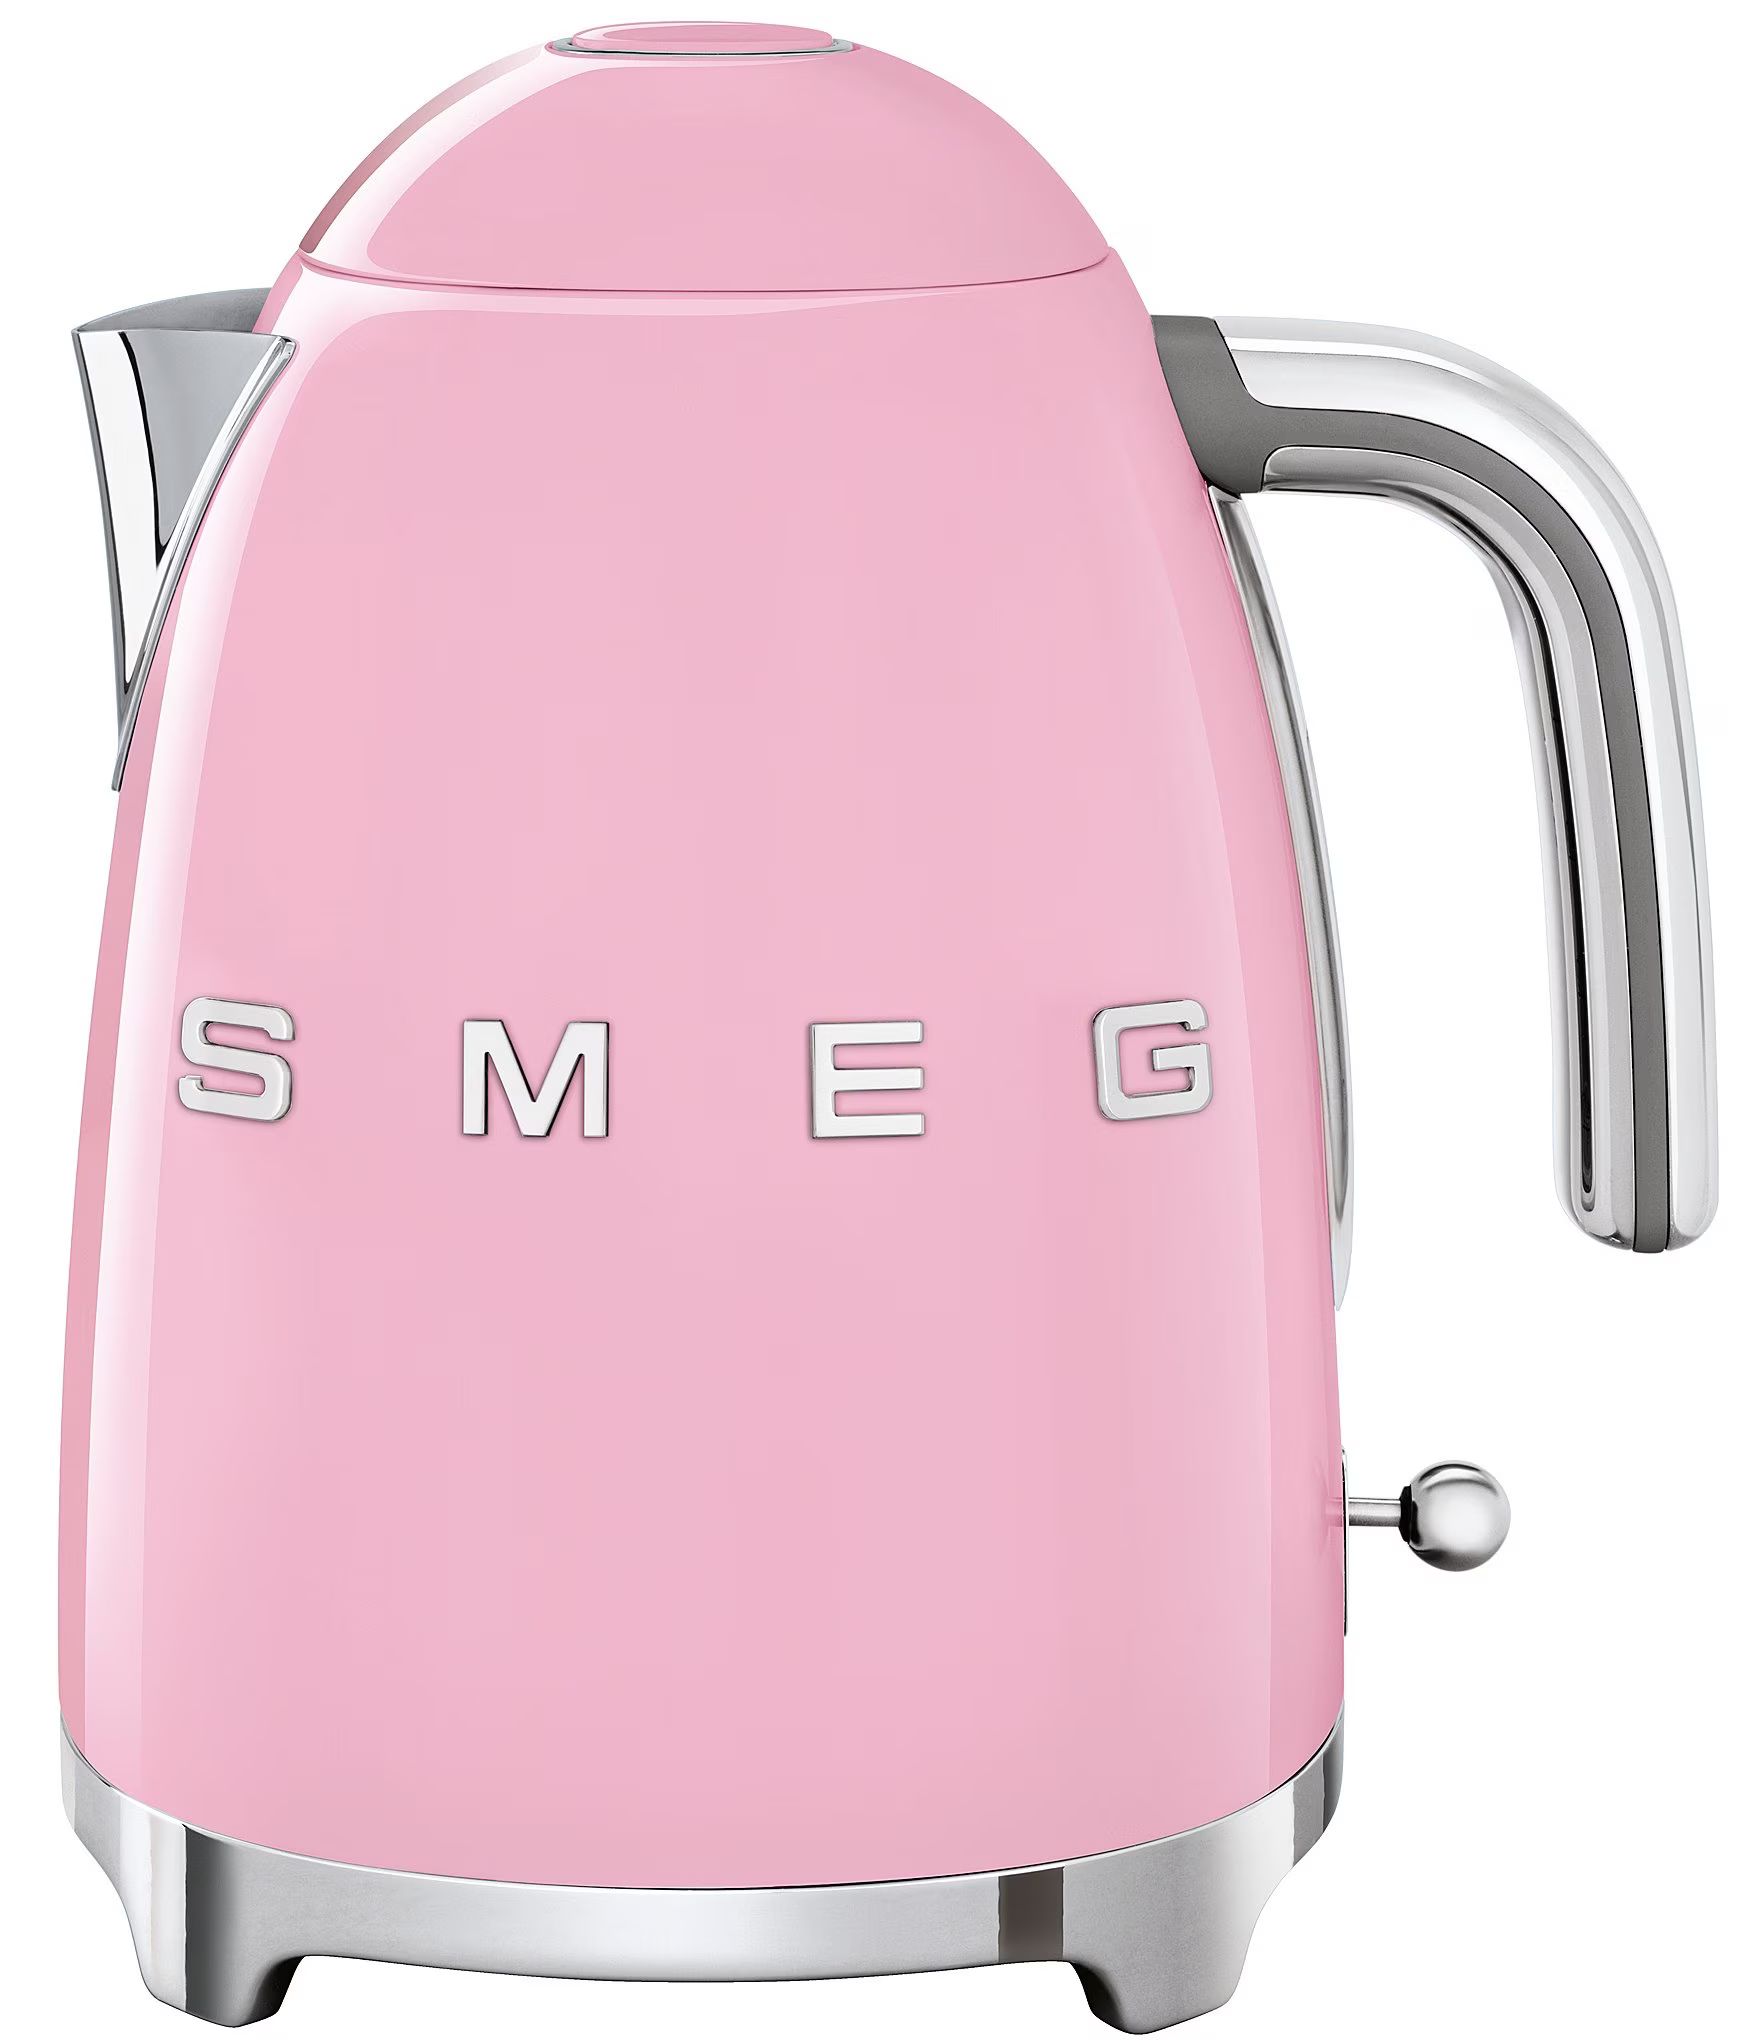 50's Retro 7-cup Electric Kettle | Dillards